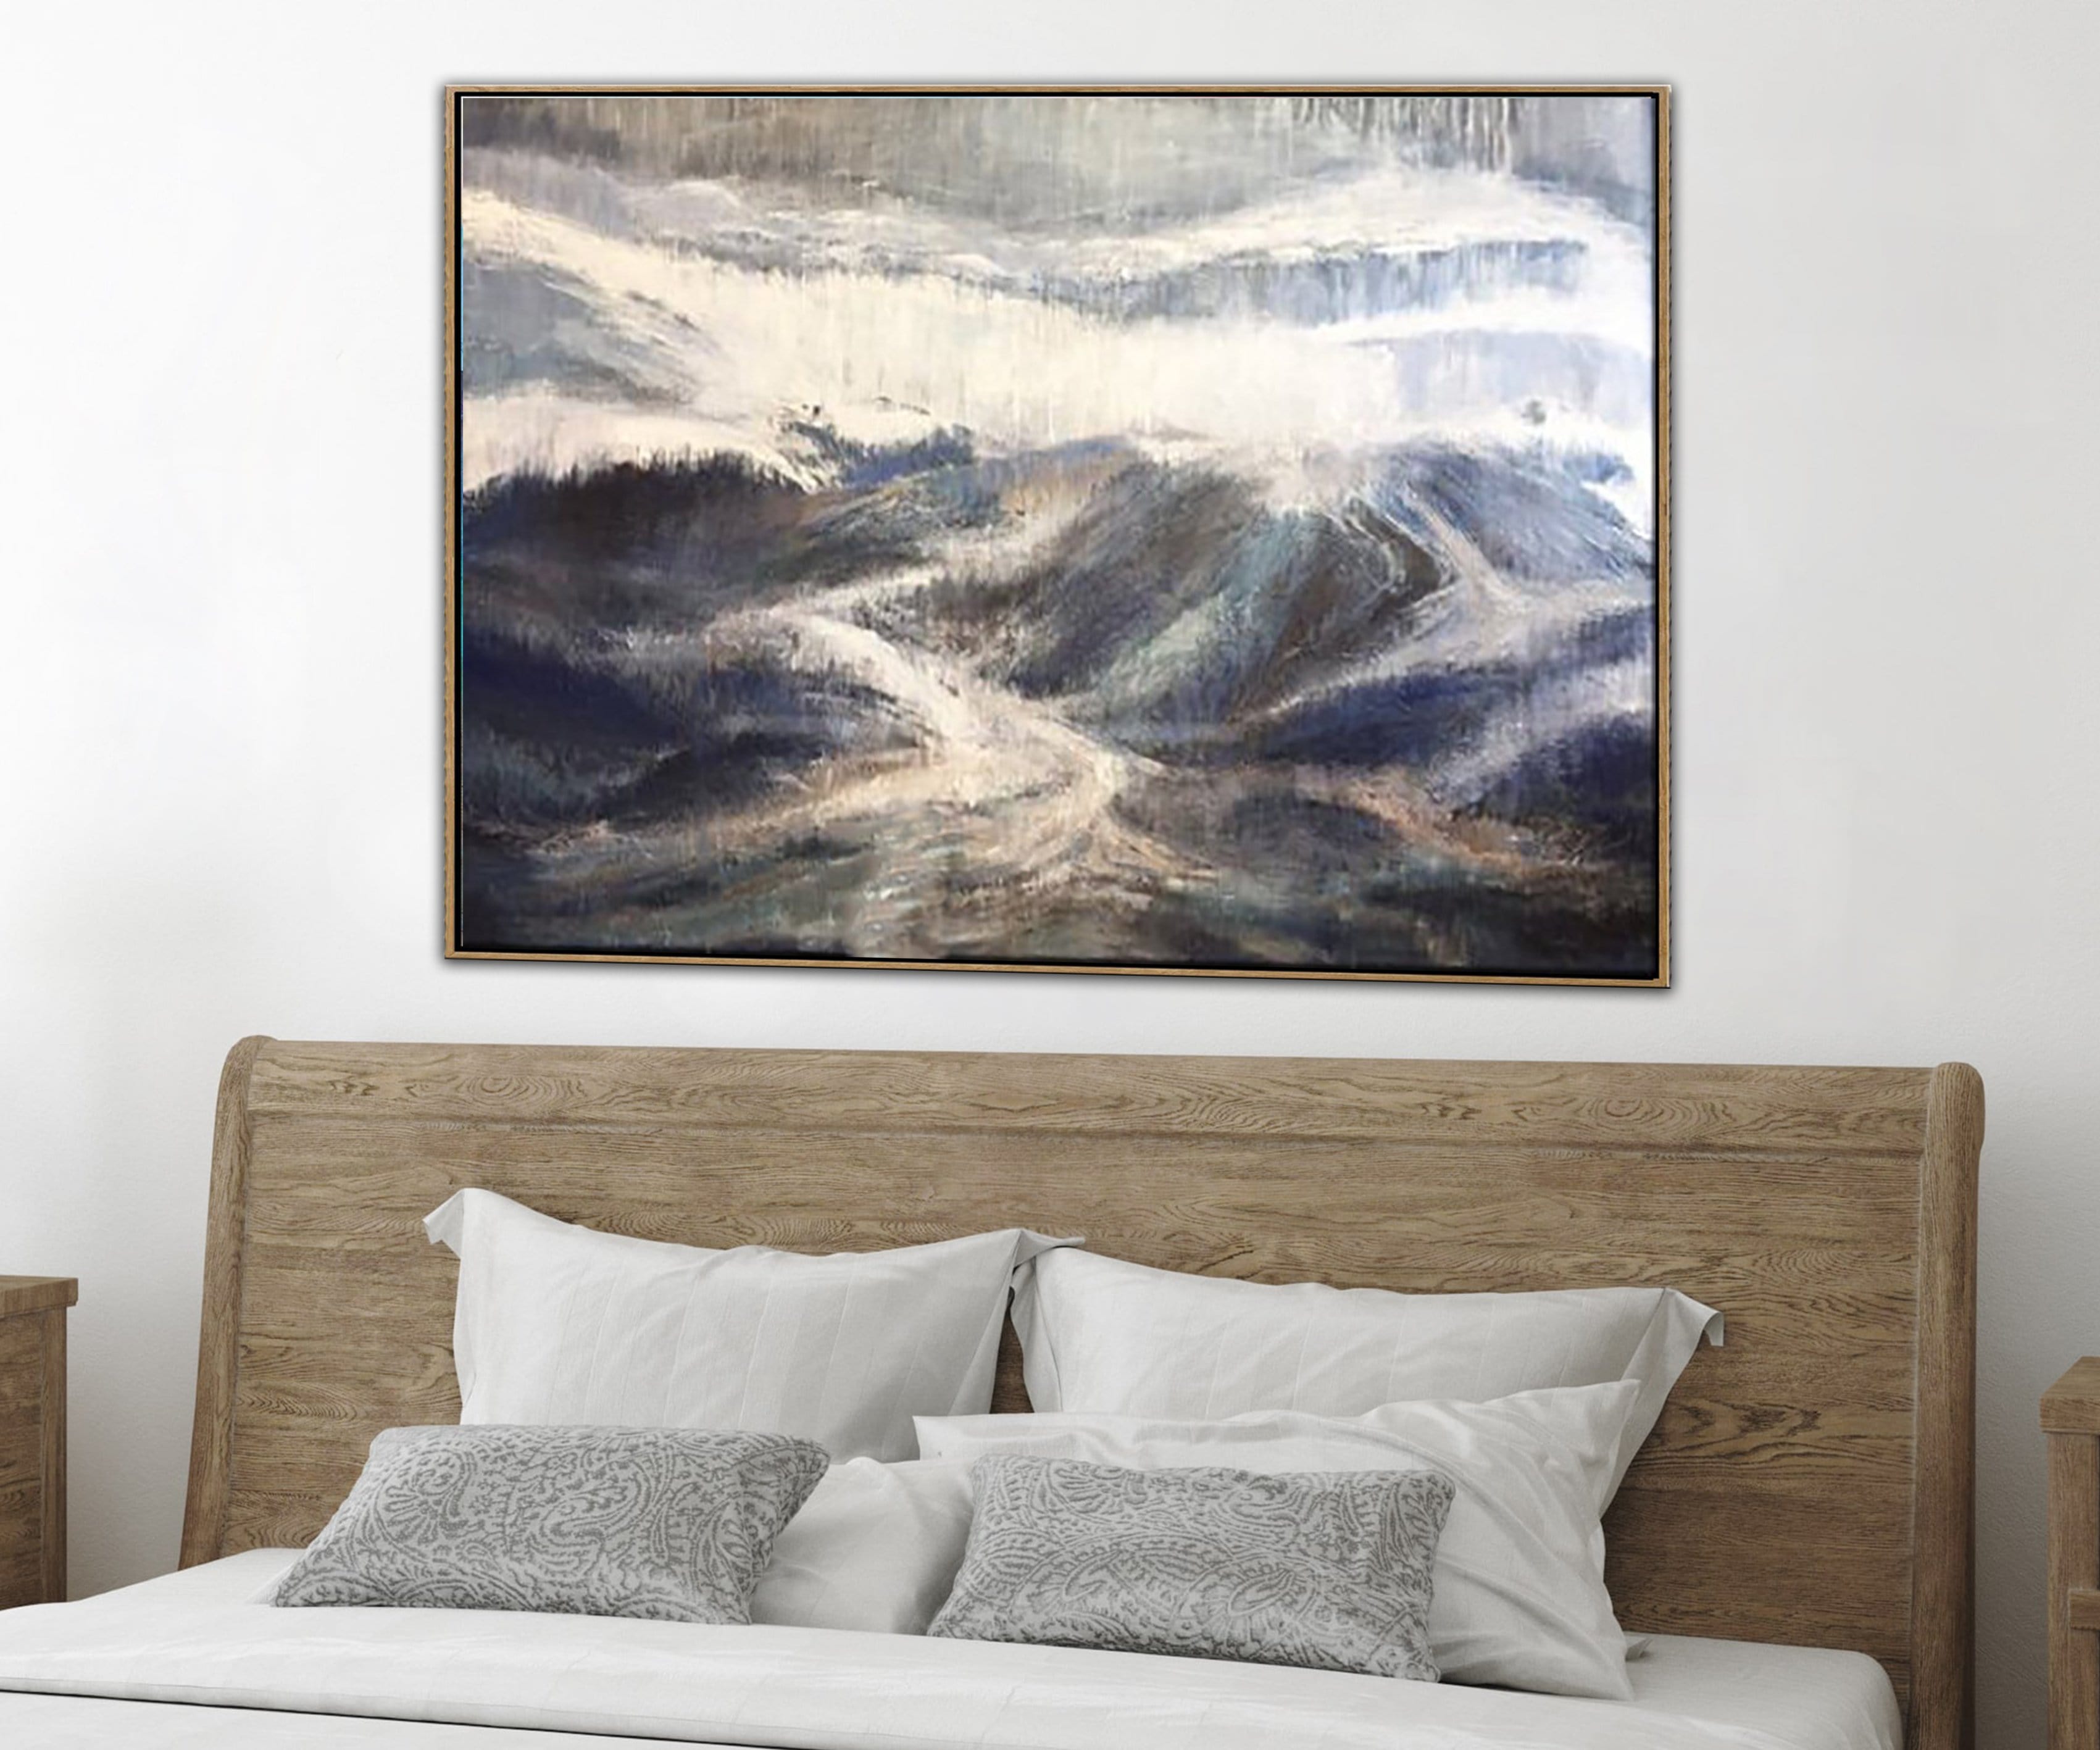 GREAT MOUNTAINS from $340